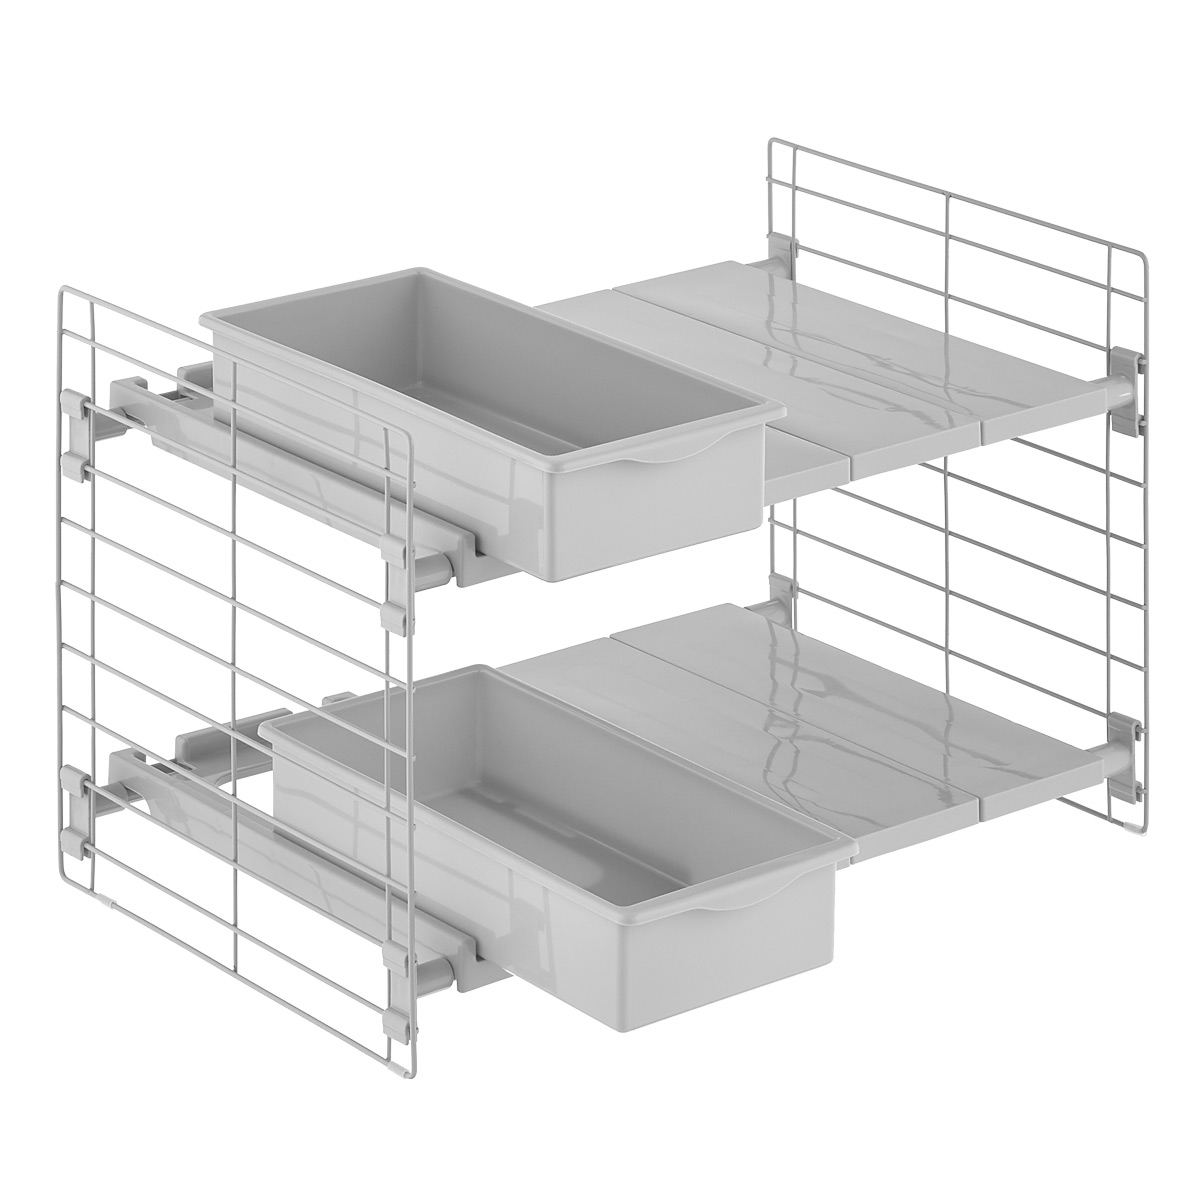 https://www.containerstore.com/catalogimages/417539/10077660_expandable_undersink_organi.jpg